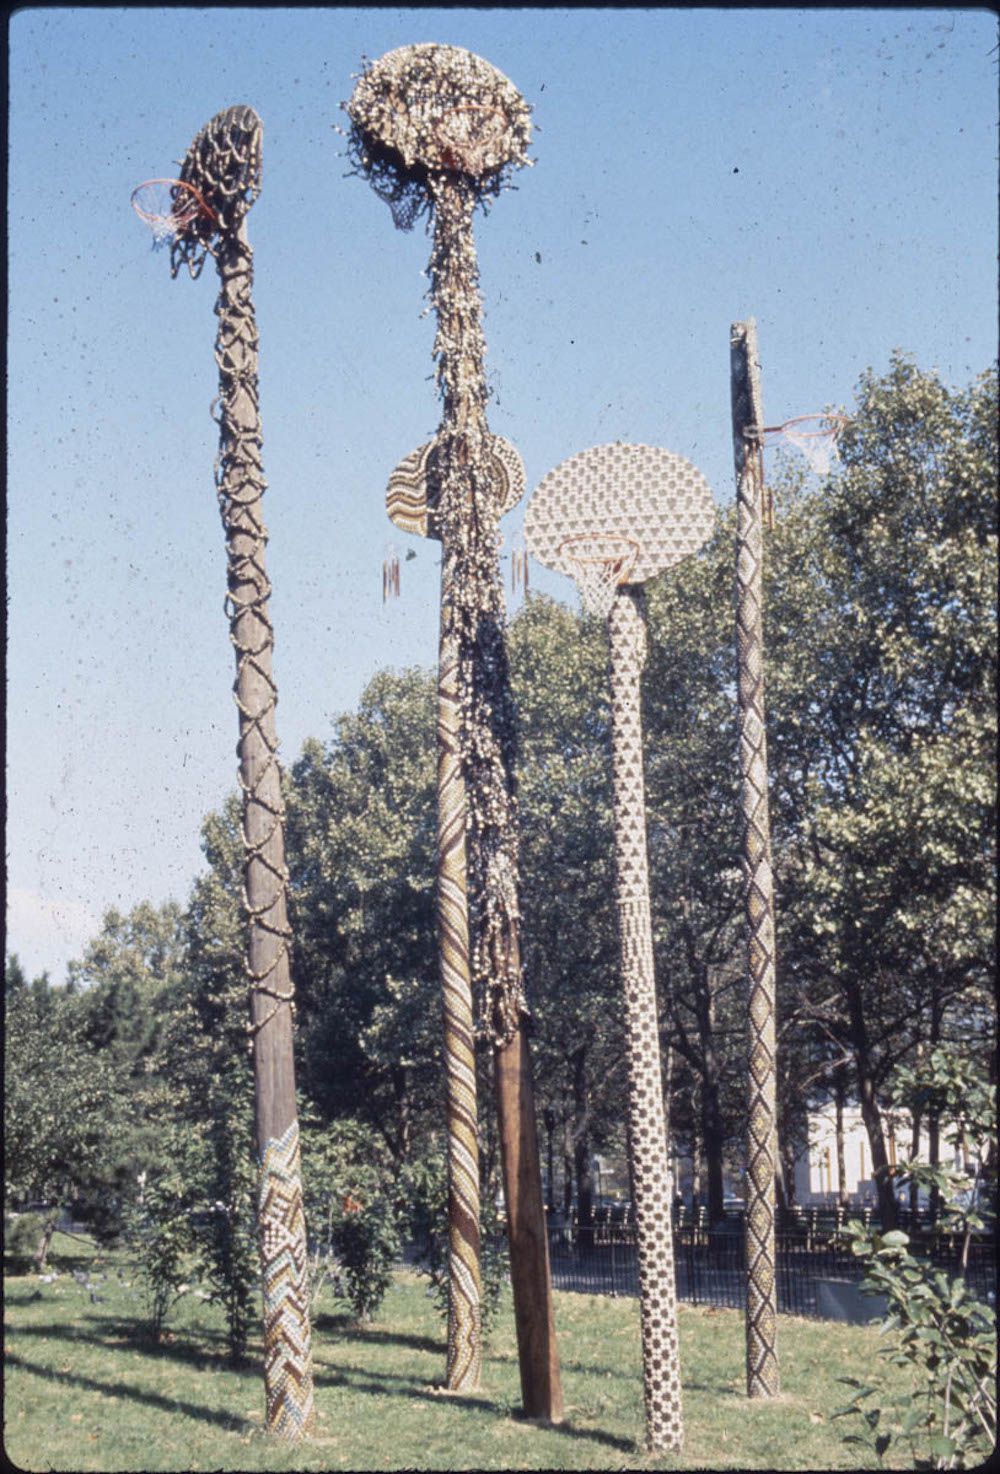 David Hammons, Higher Goals, 1986, Cadman Plaza Park, Brooklyn, photo by Pinkney Herbert and Jennifer Secor, courtesy of Public Art Fund. For Higher Goals, Hammons covered five telephone poles mounted with a basketball backboard and net with bottlecaps.  Hammons stated, “It takes five to play on a team, but there are thousands who want to play—not everyone will make it, but even if they don’t at least they tried.”<br/>